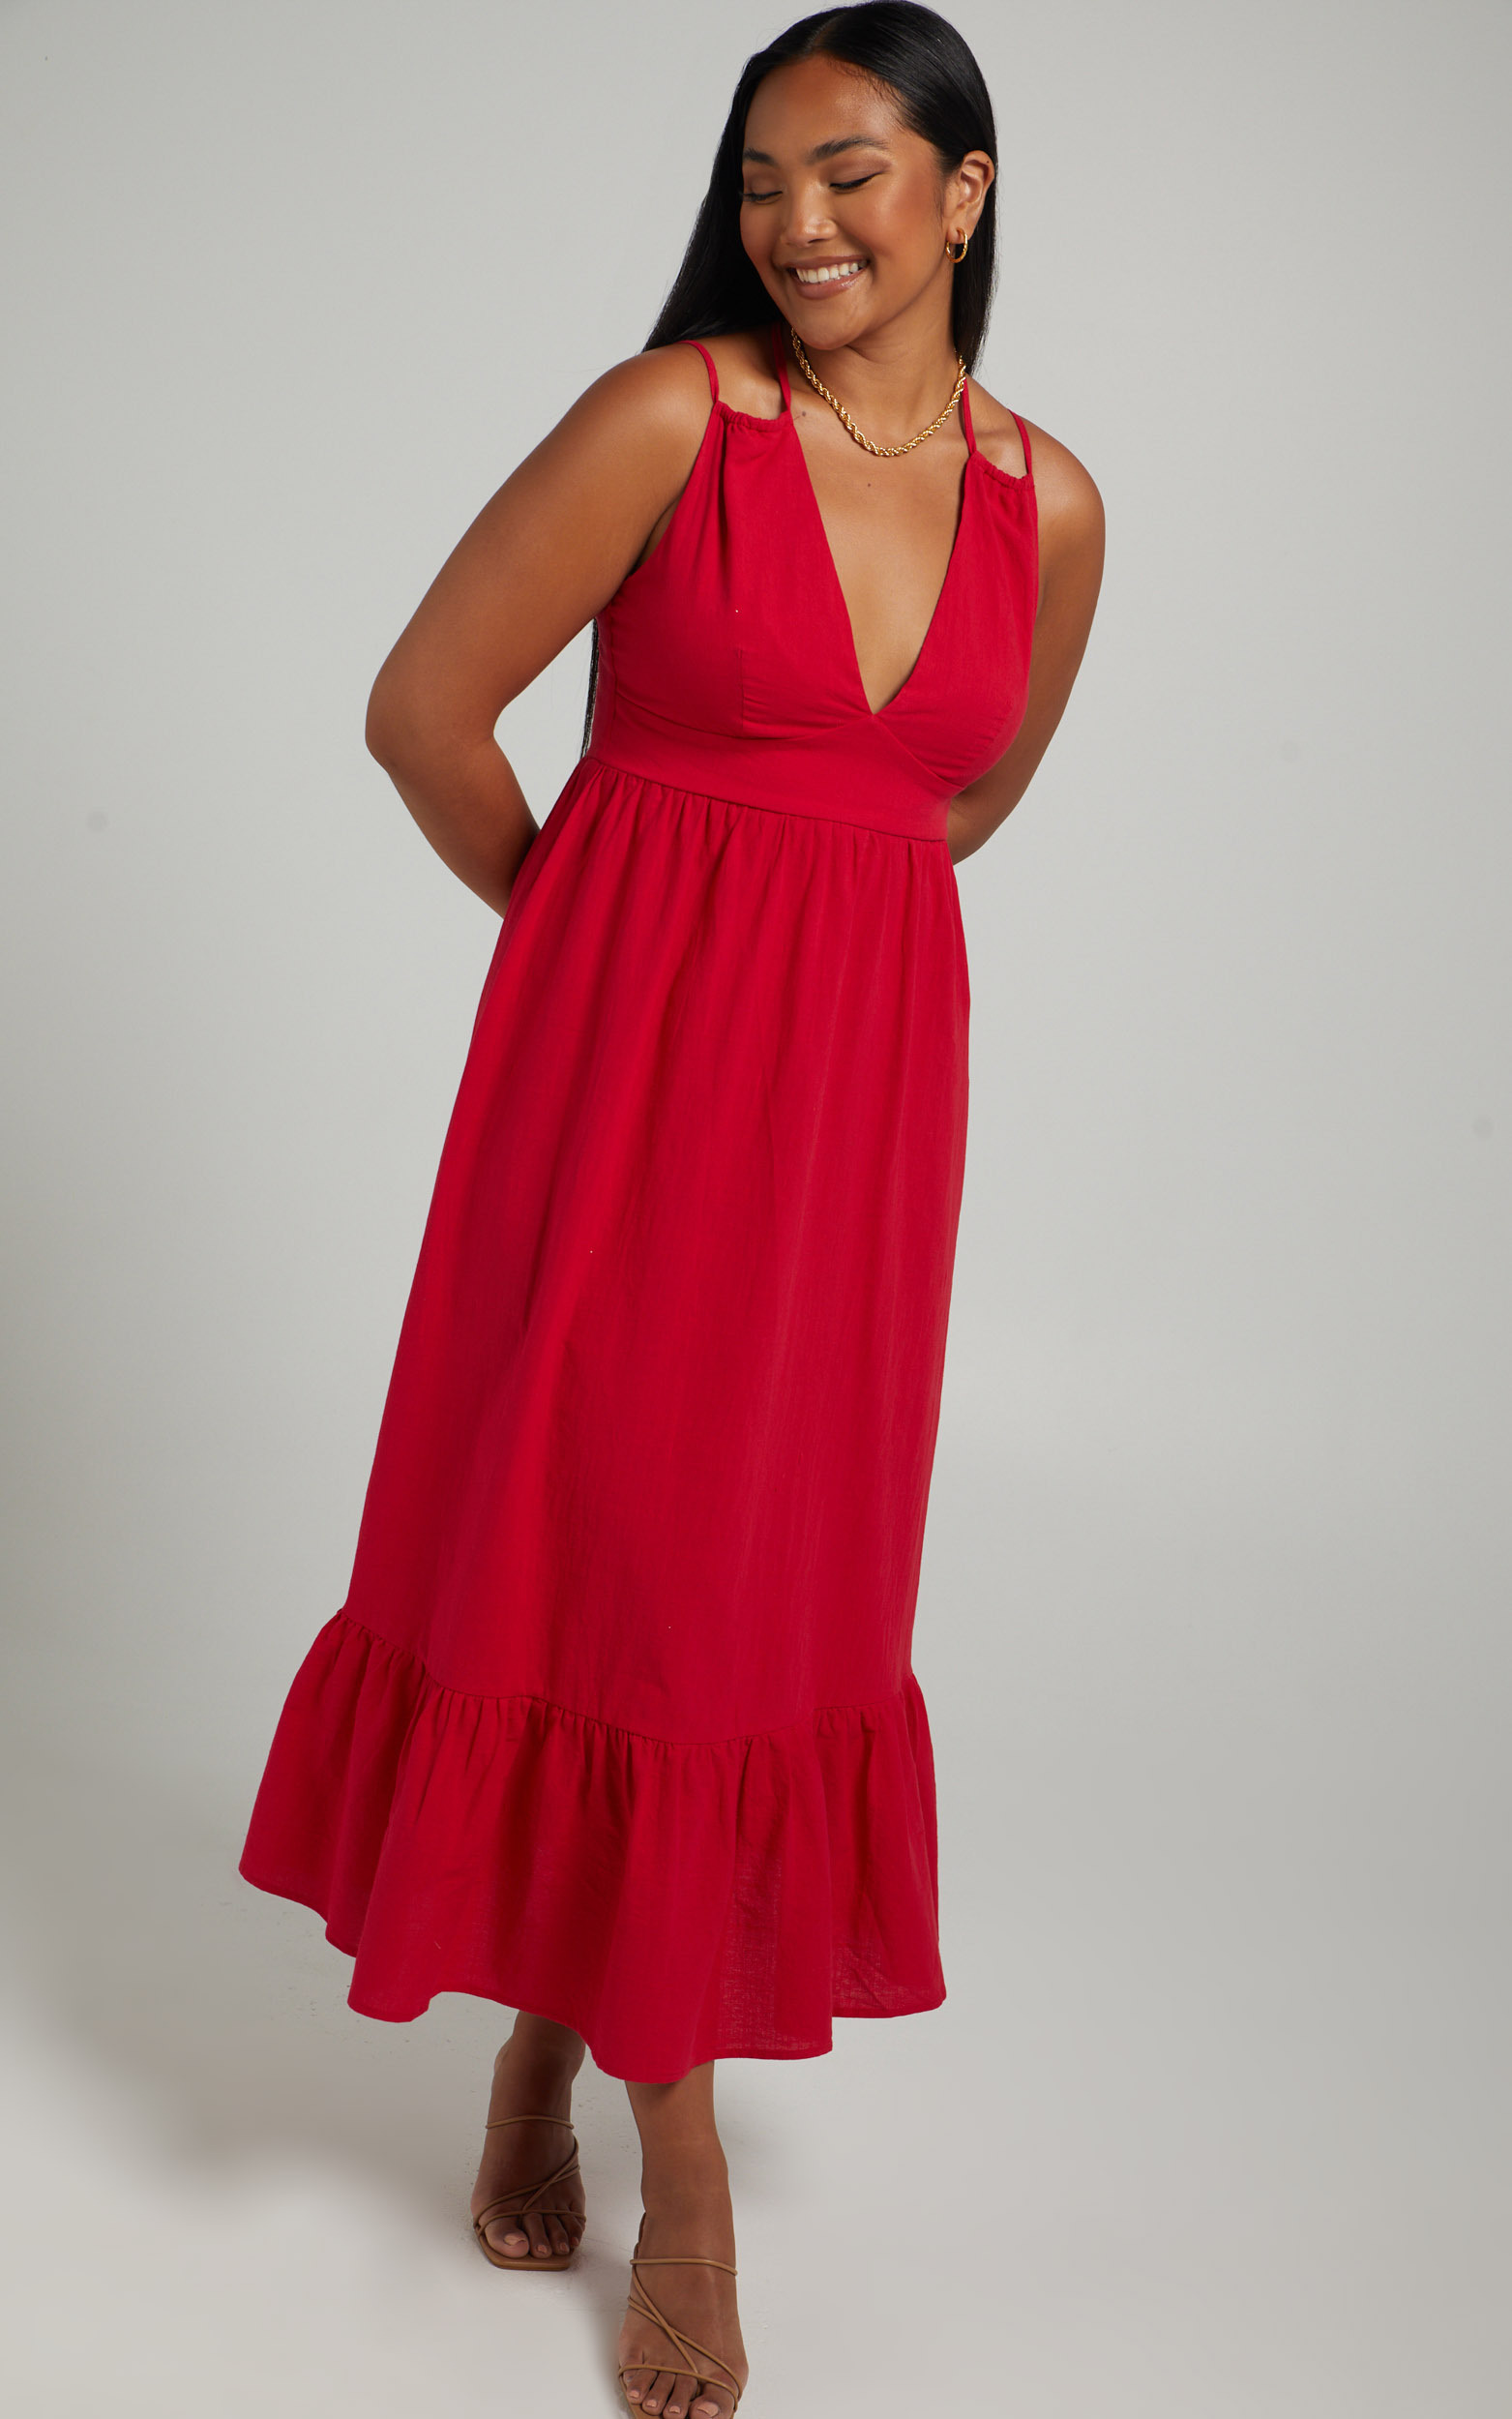 Zhan Double Strap Maxi Dress in Red - 06, RED1, hi-res image number null